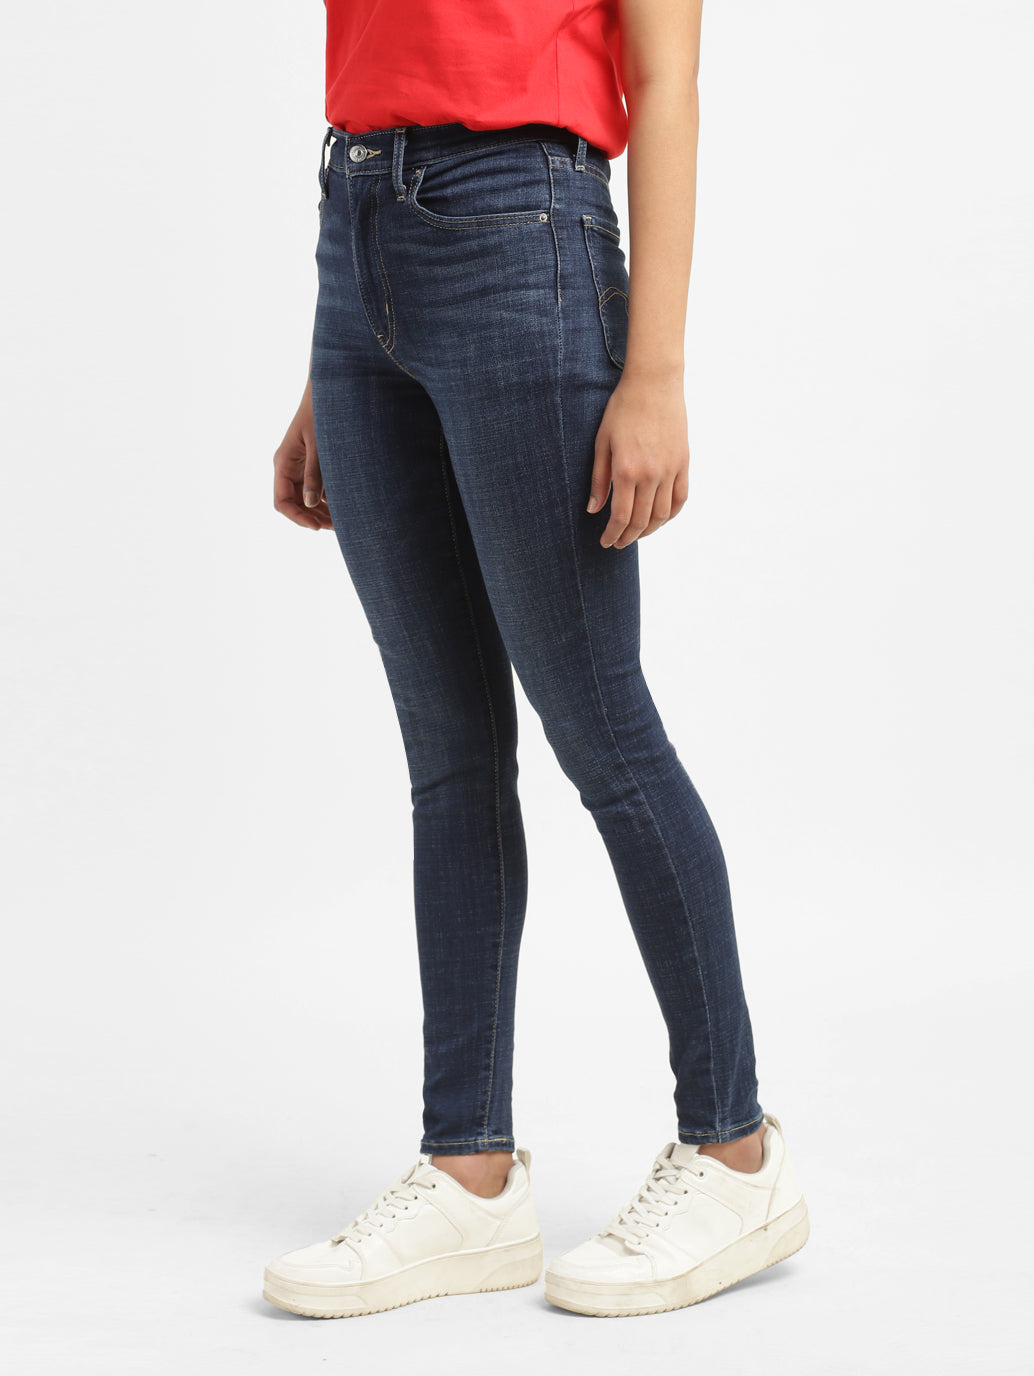 Women's High Rise Mile High Skinny Jeans